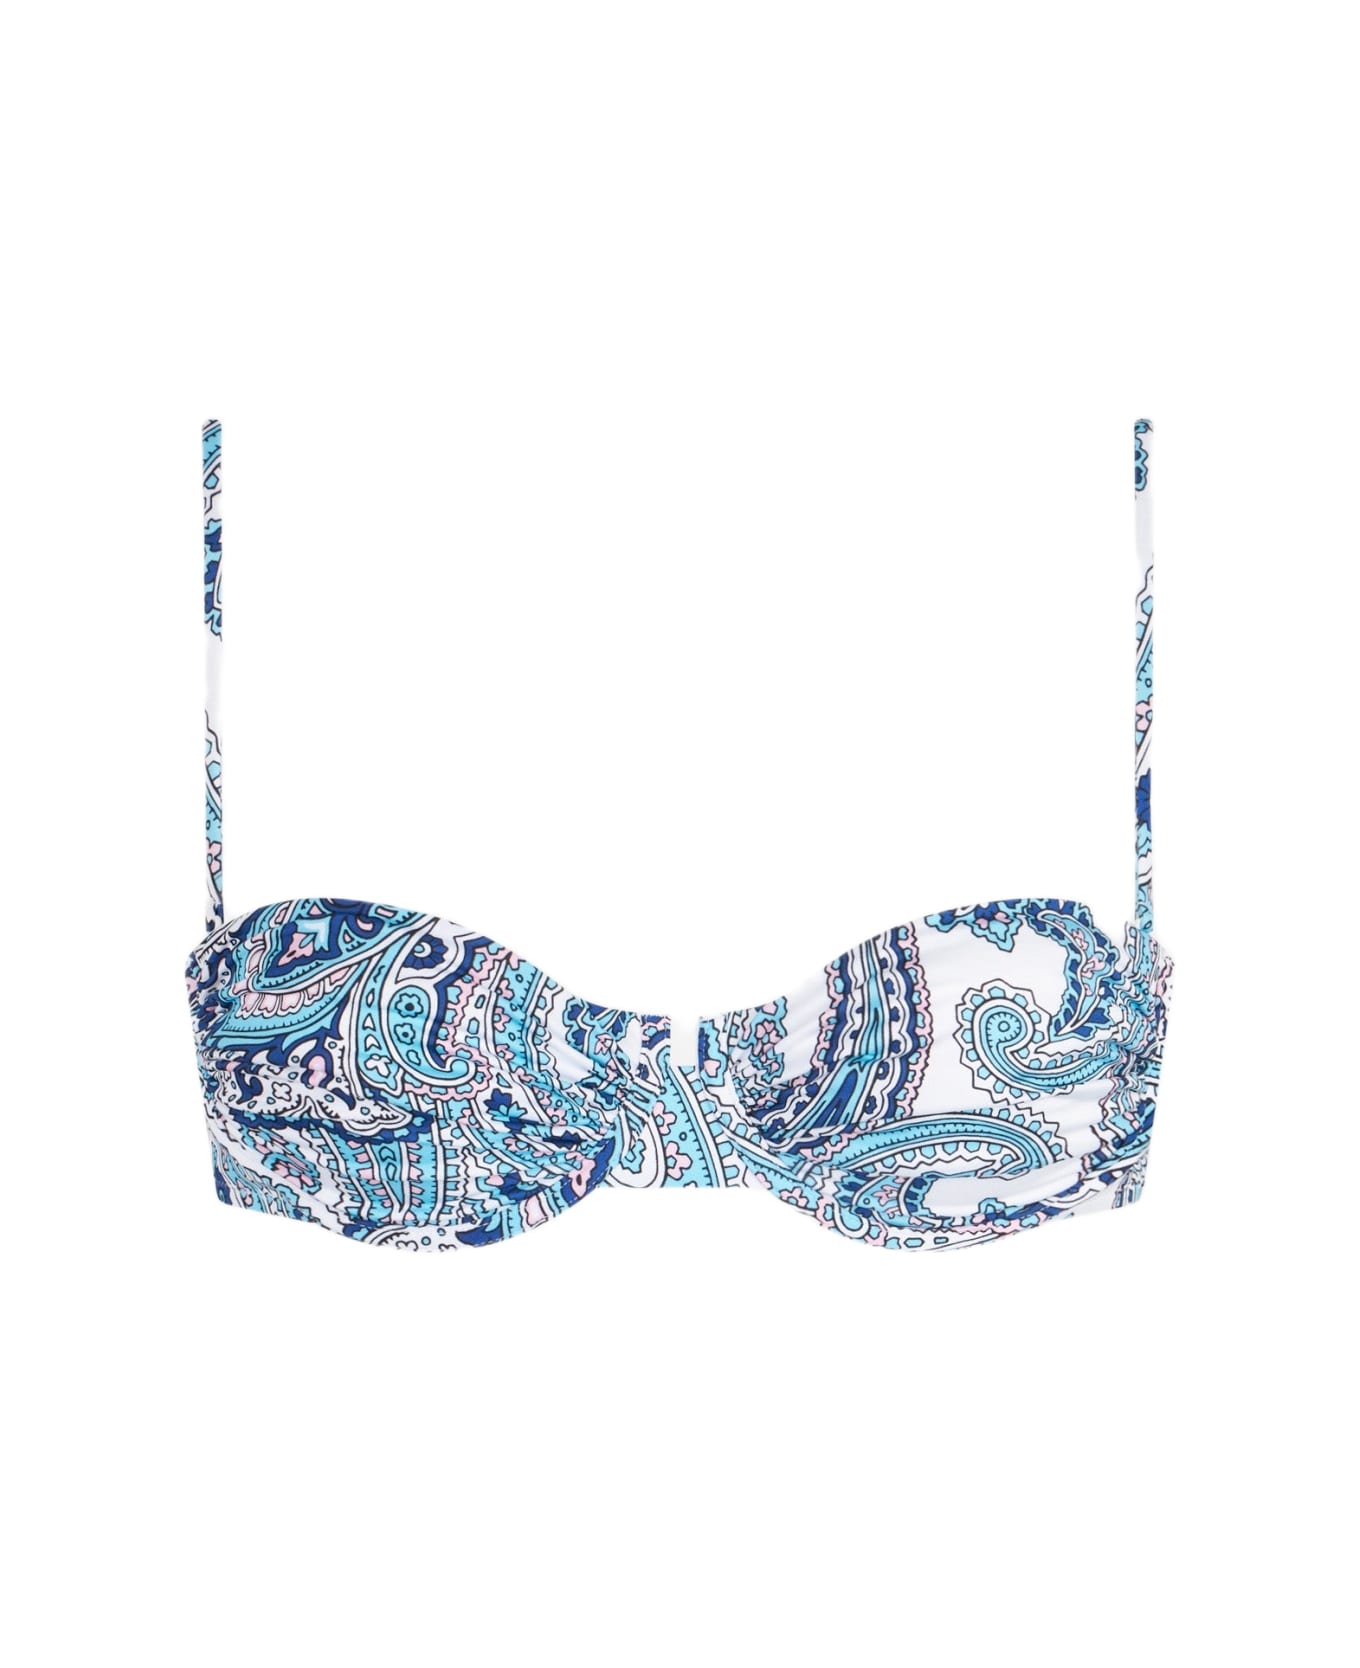 MC2 Saint Barth Woman Underwired Bralette With Paisley Print - BLUE